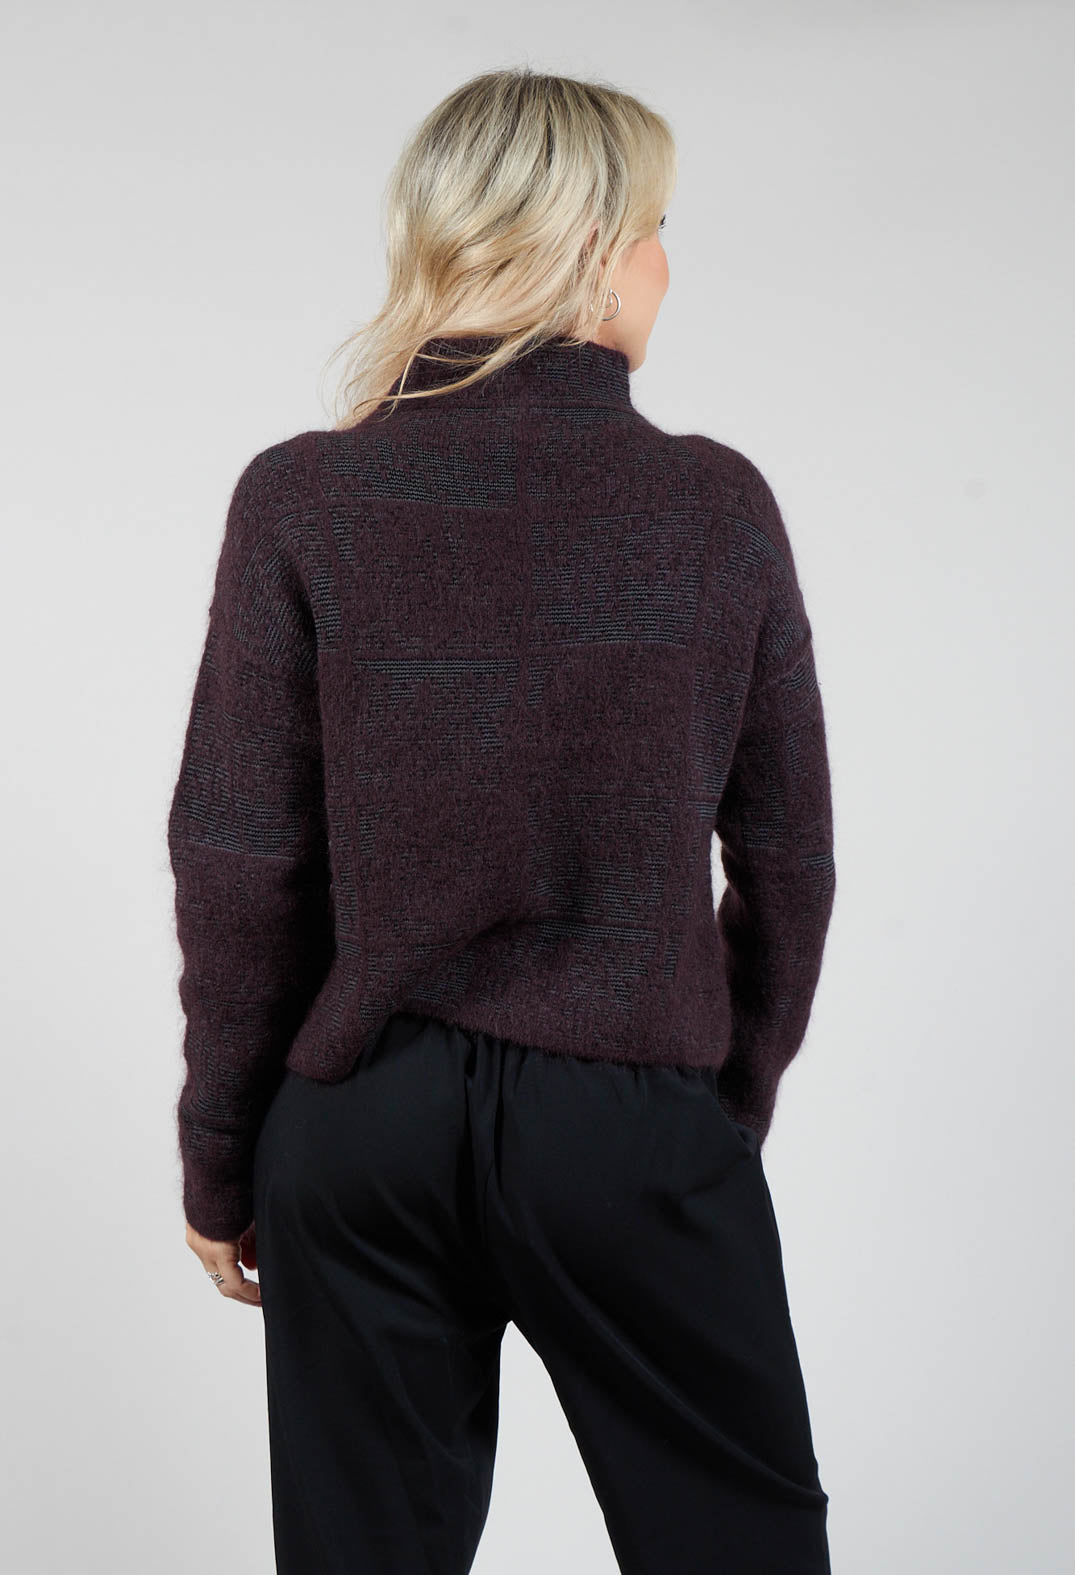 Jumper with Check Design in Plum